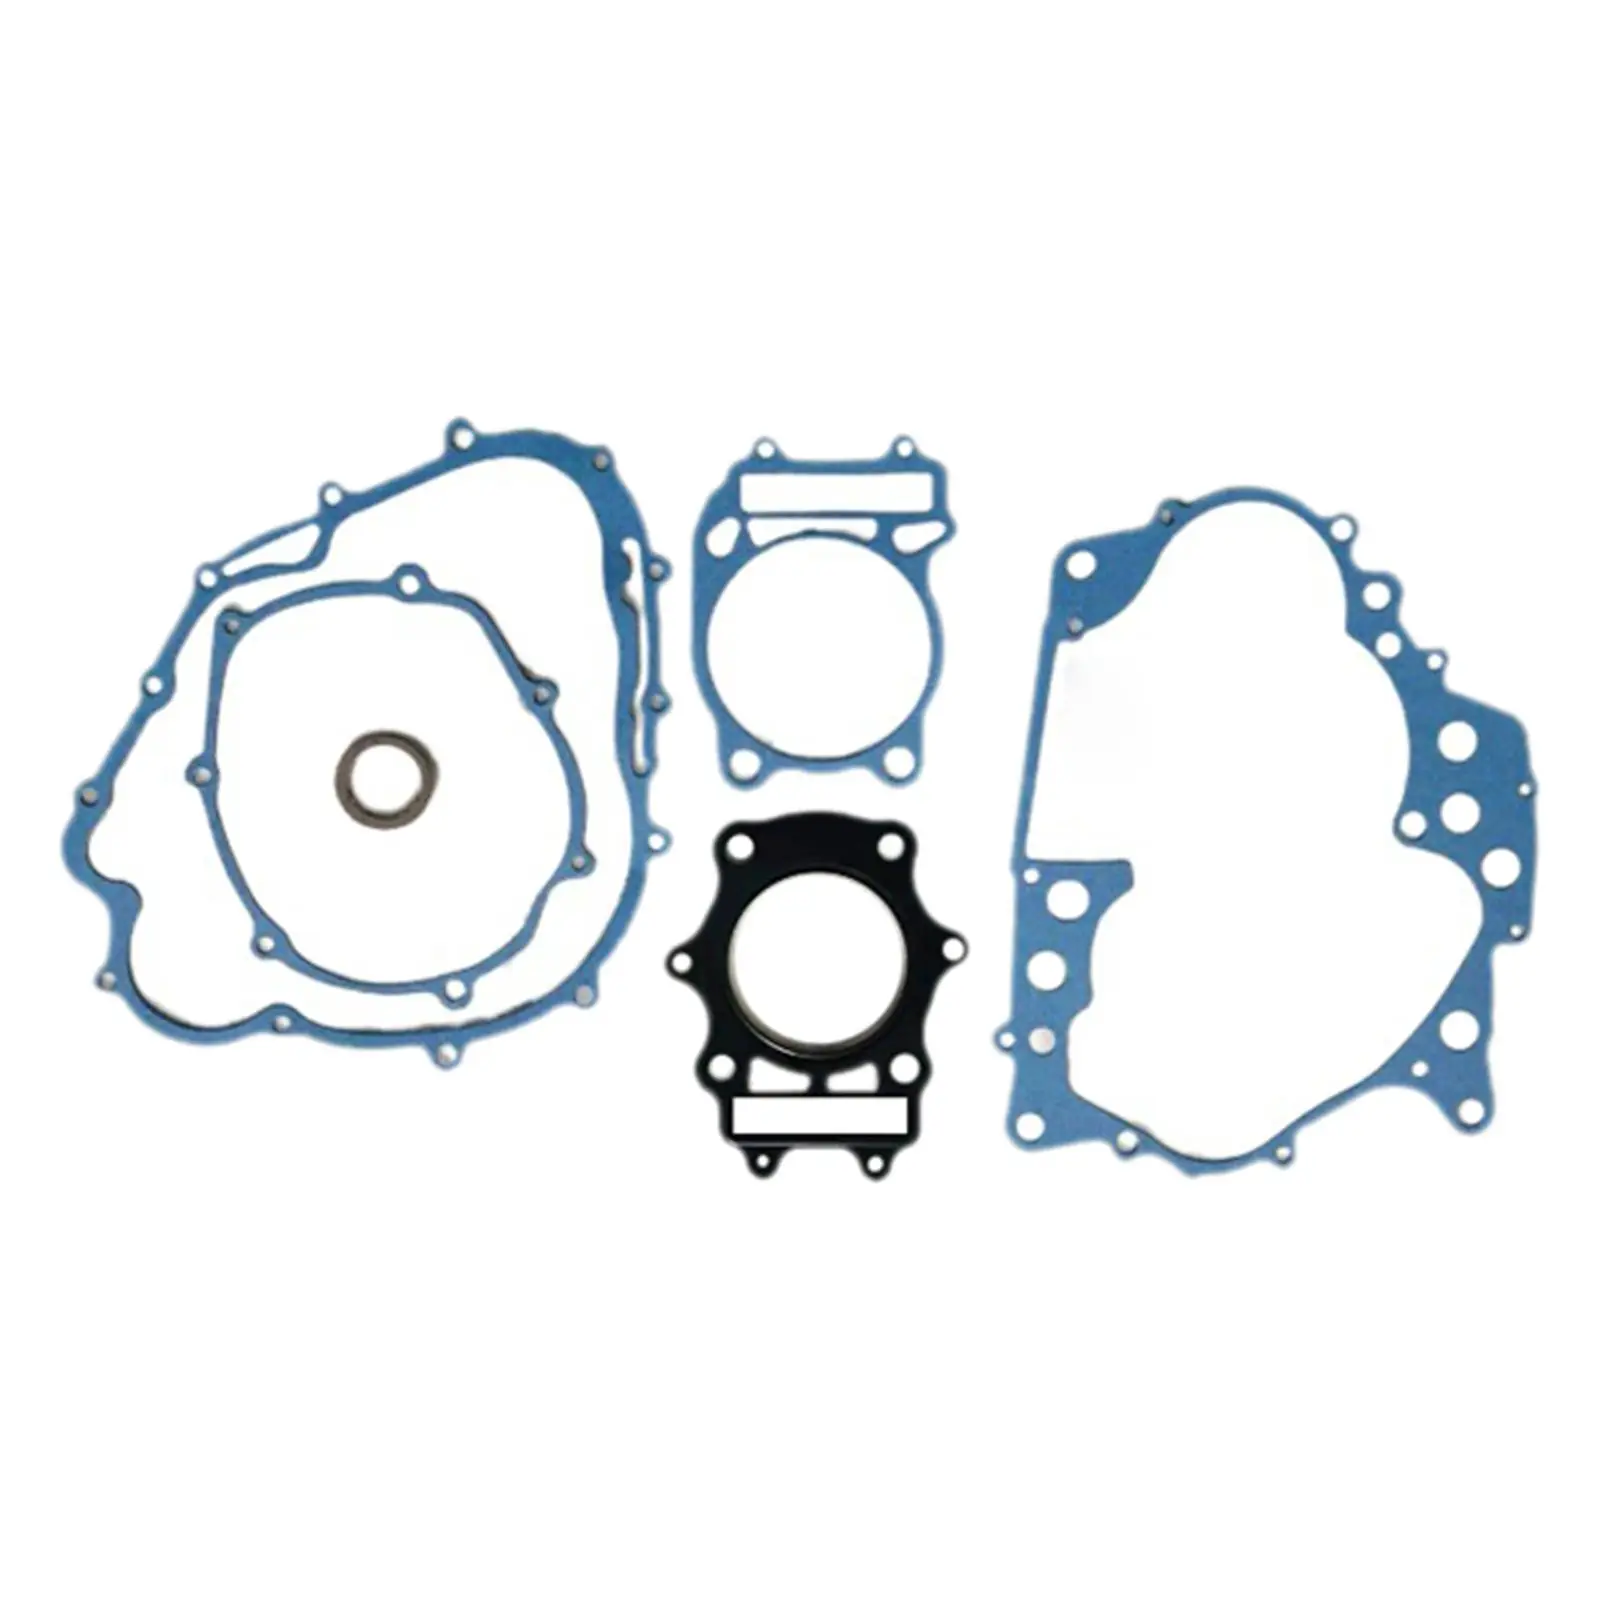 Motor Complete Gaskets Repair Assy for for 350 M GS24 93 94 95